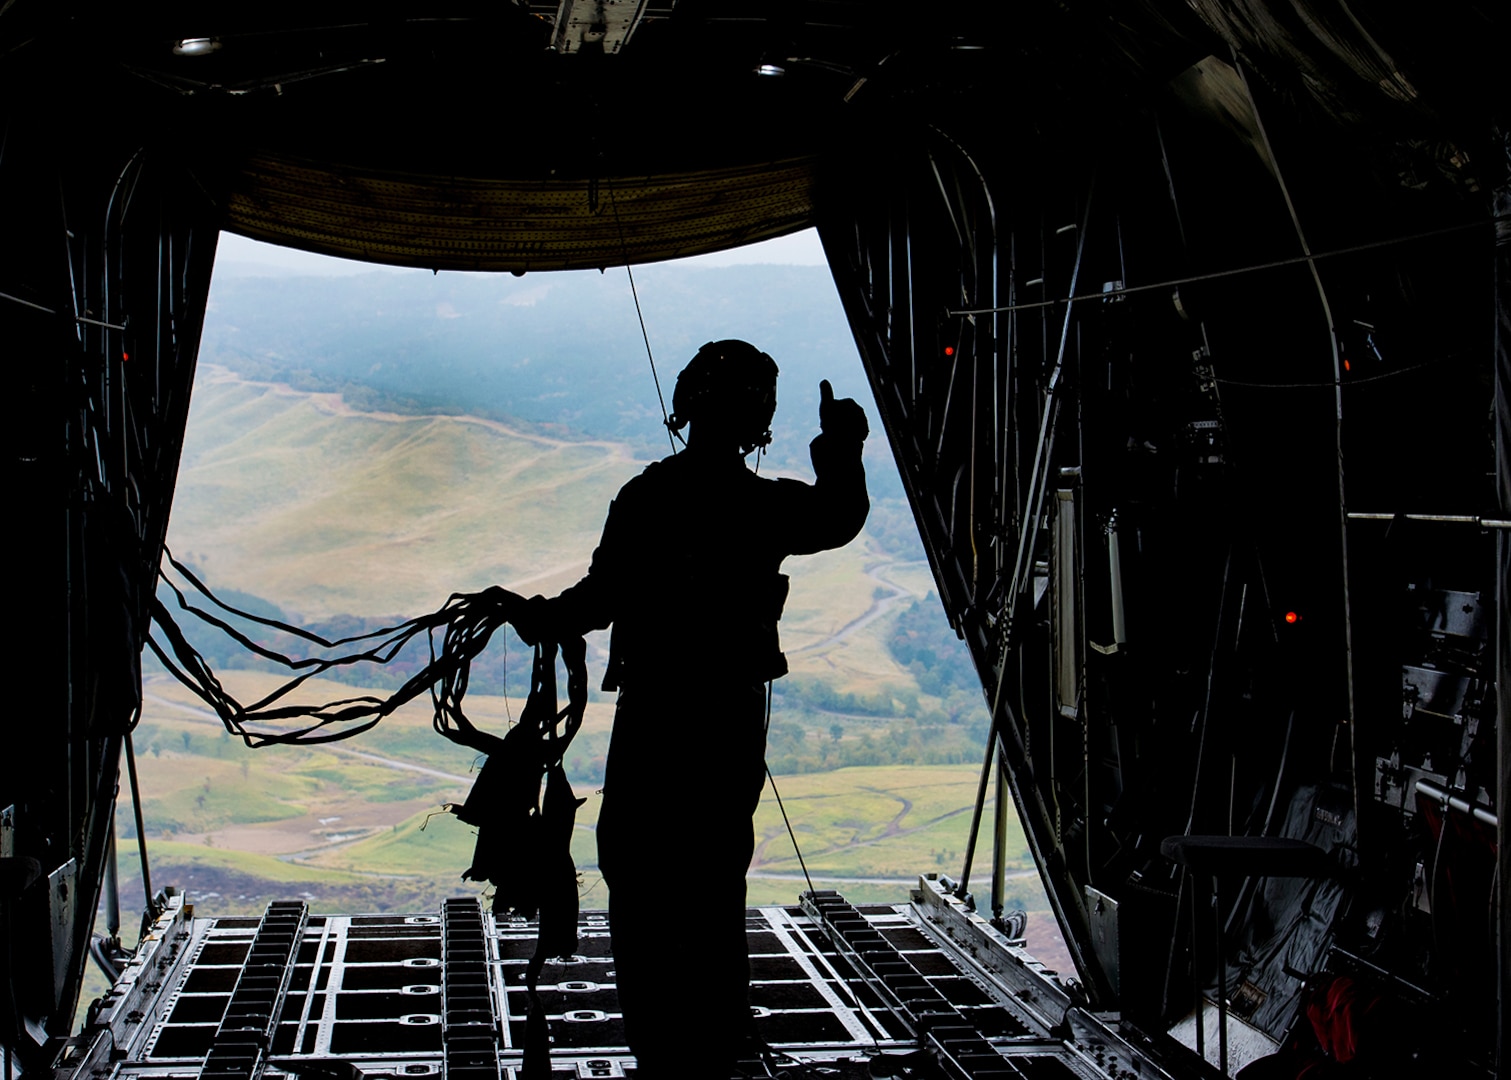 Senior Airman Anthony Schoof, 36th Airlift Squadron C-130 Hercules loadmaster, observes Japan Ground Self-Defense Force container delivery system bundles parachute to a drop zone during Keen Sword 2017, Nov. 10, 2016, over the Kyushu prefecture, Japan. Keen Sword is designed to practice the critical capabilities to support the defense of Japan, and to respond to a potential crisis or contingency in the Indo-Asia-Pacific region.